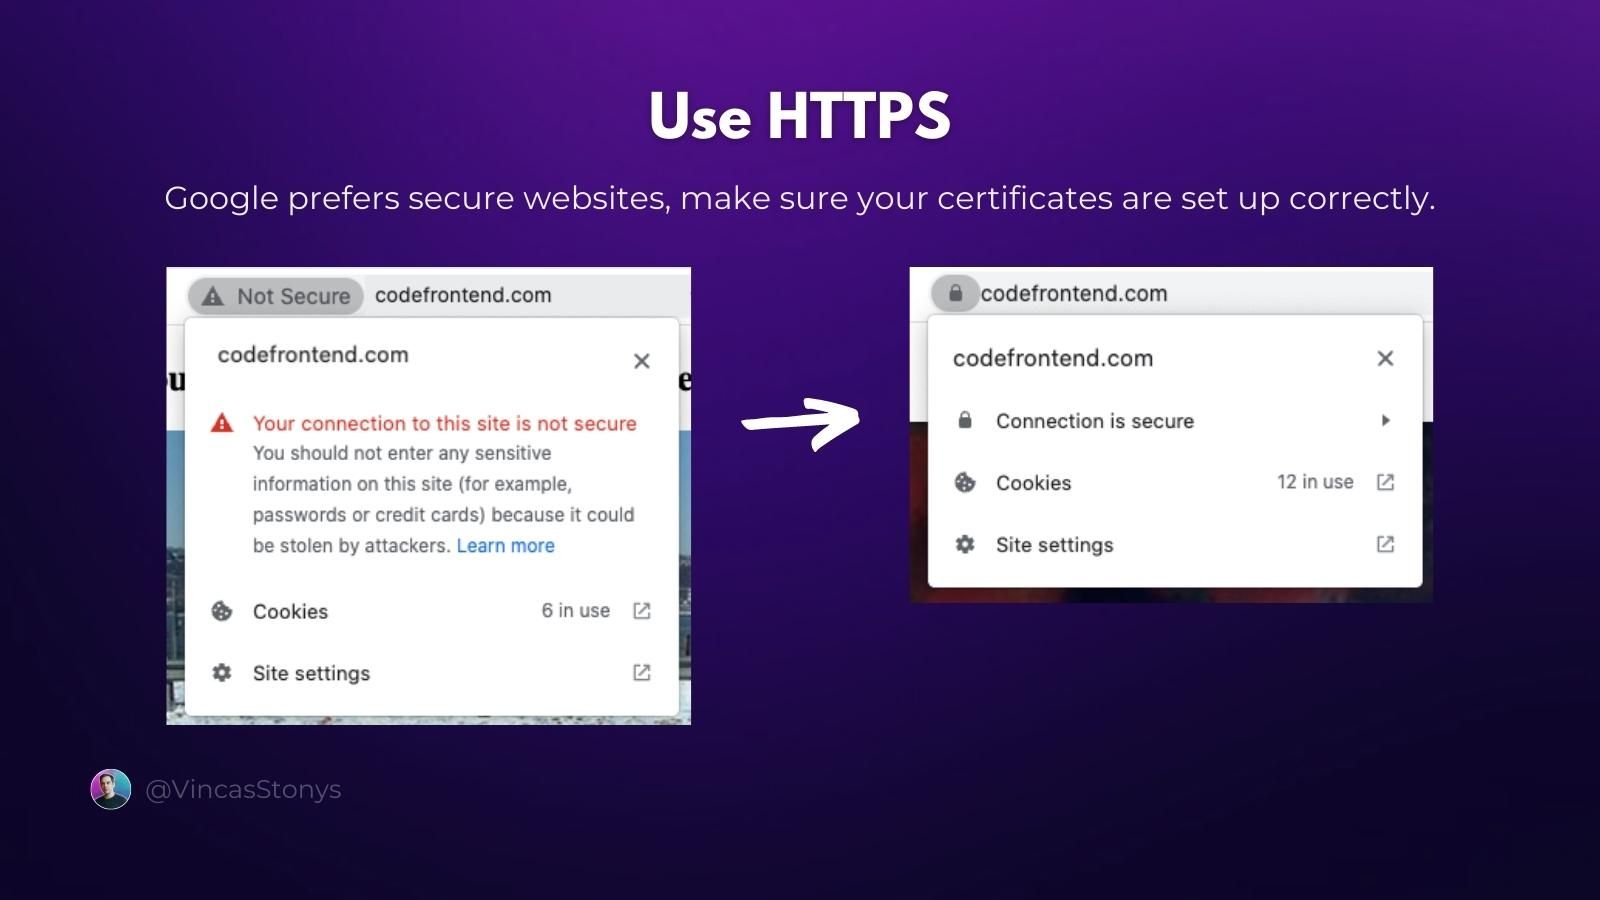 Unsecure page identified with "Not Secure" warning in the browser's navigation bar.